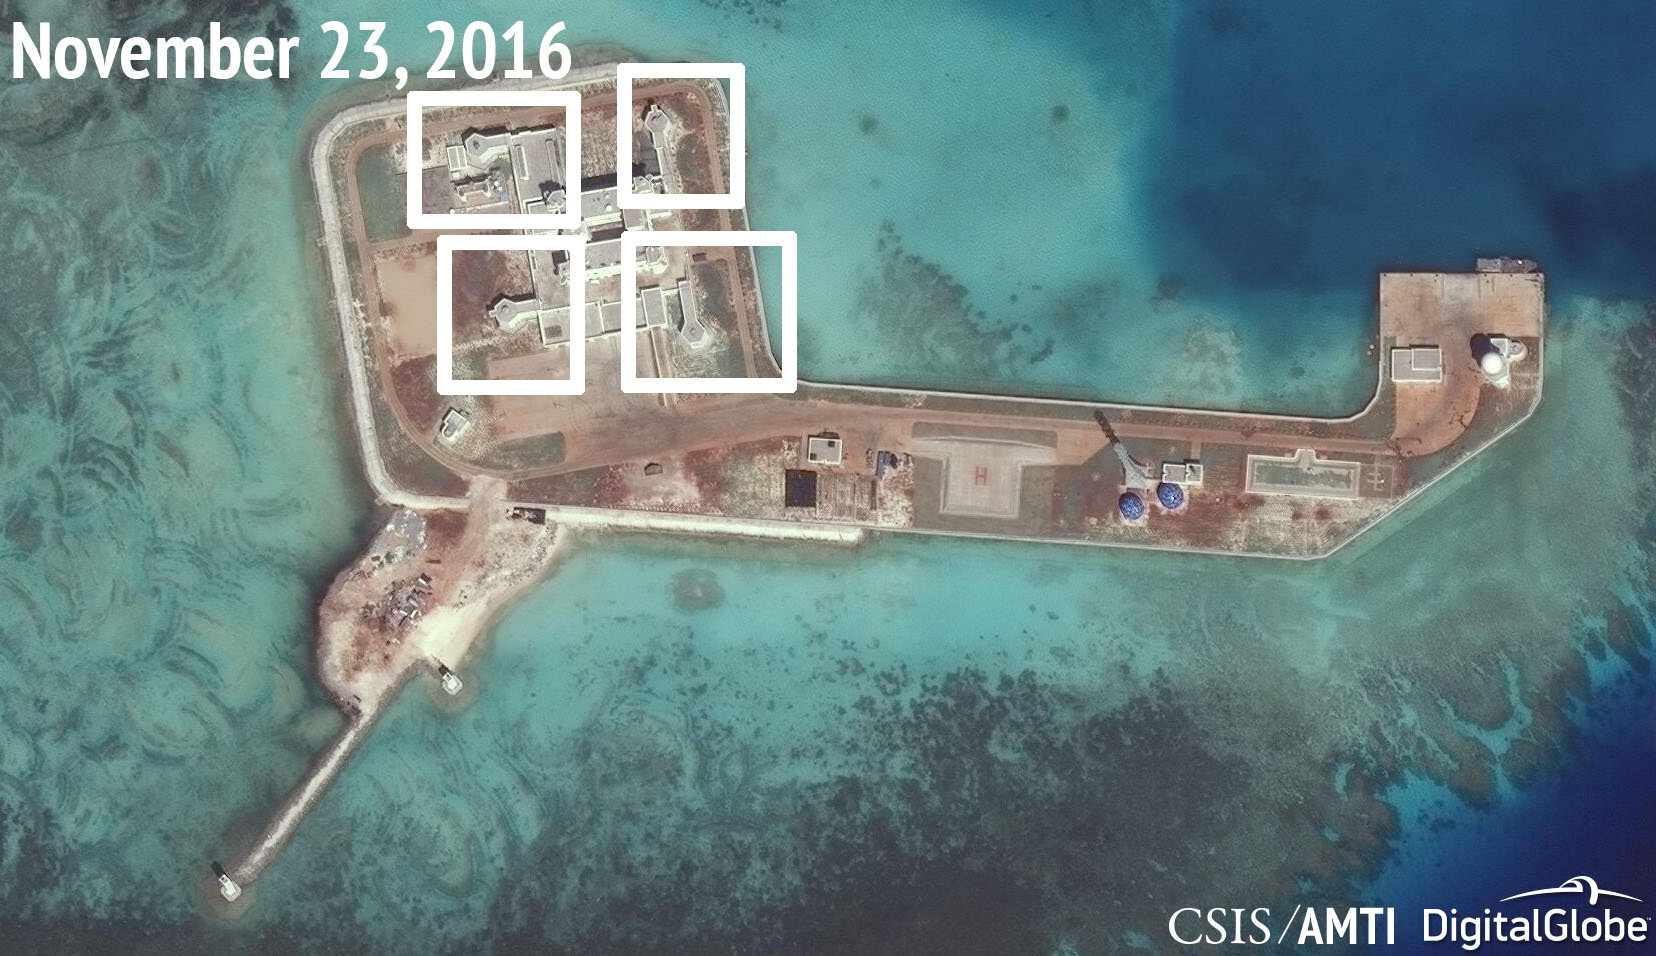 A satellite image shows what CSIS Asia Maritime Transparency Initiative says appears to be anti-aircraft guns and what are likely to be close-in weapons systems (CIWS) on the artificial island Hughes Reef in the South China Sea in this image released on D